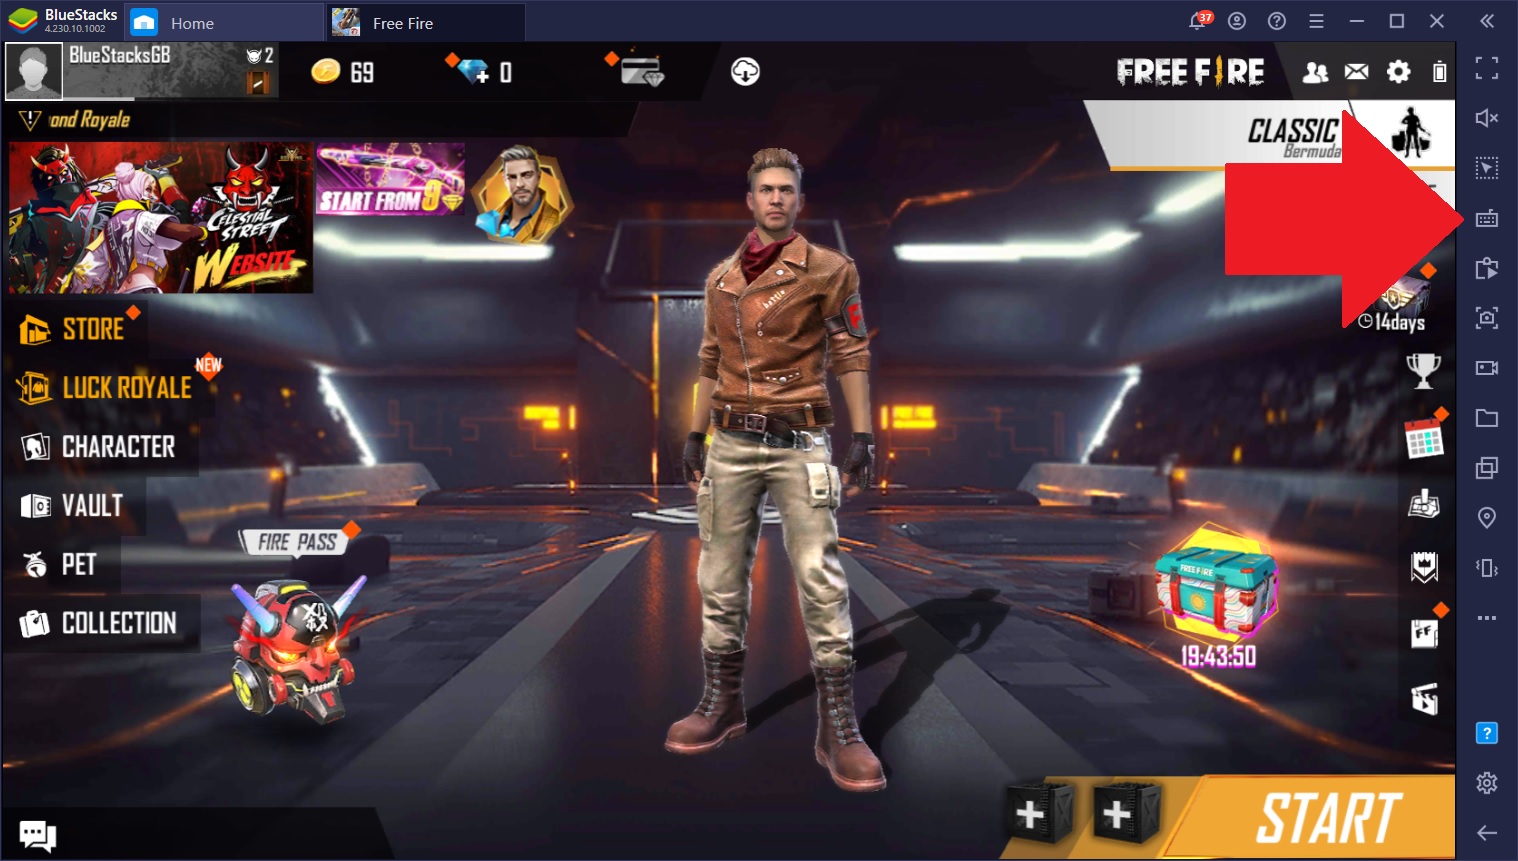 Free Fire PC VS Free Fire Emulator  Which one gives you better gameplay? 